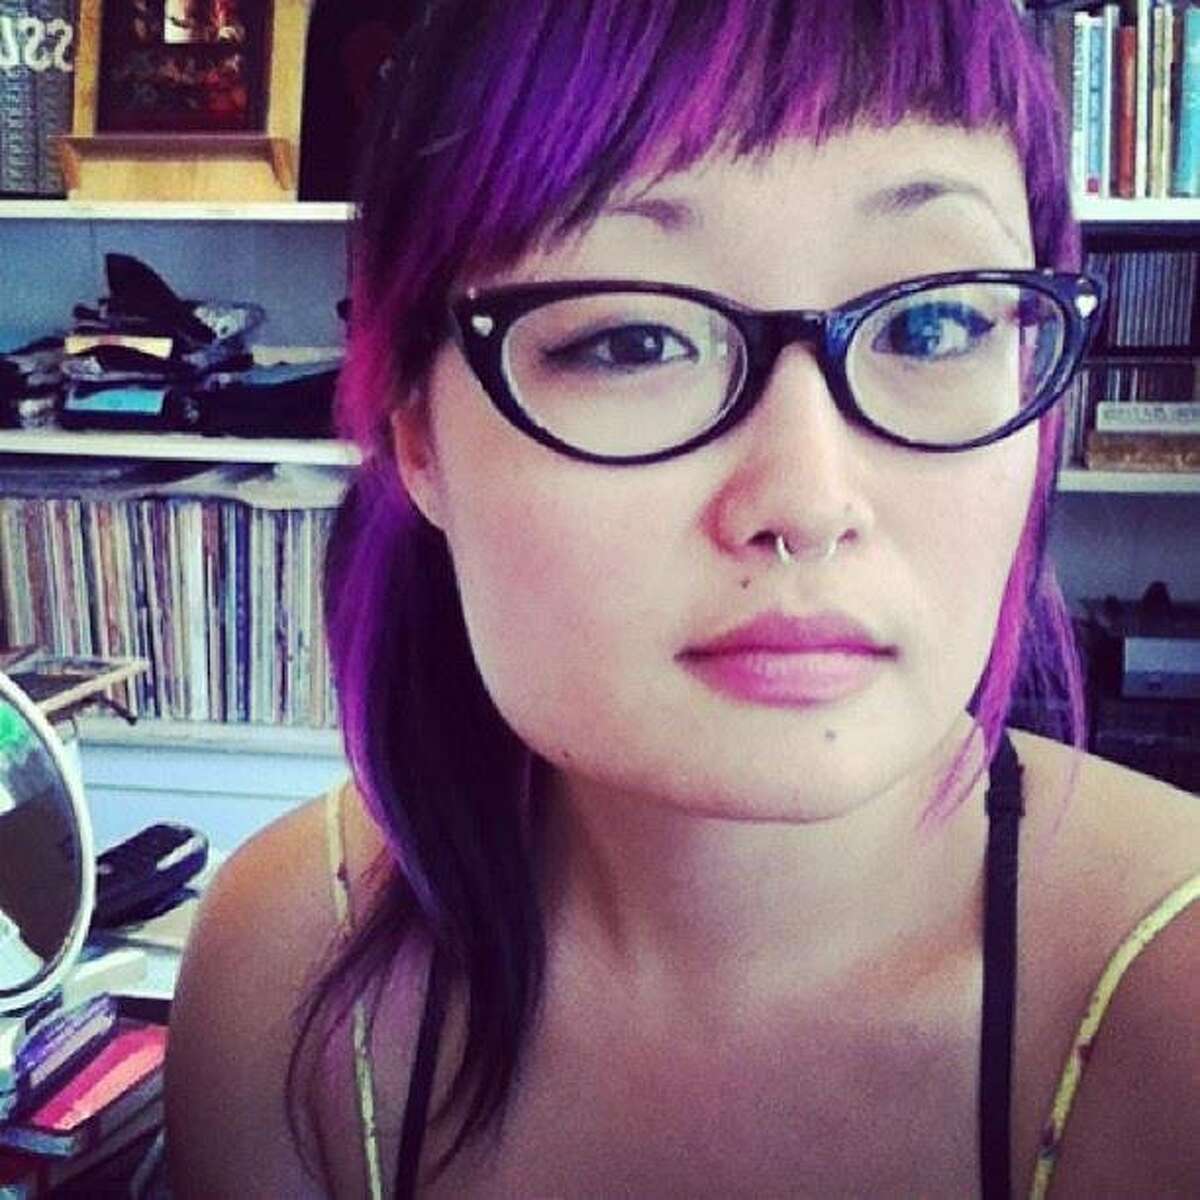 Kiyomi Tanouye, 31, was one of at least 36 people who died in Friday night's fire at an Oakland warehouse known as the Ghost Ship. She was a music manager at Shazam. Photo: Facebook